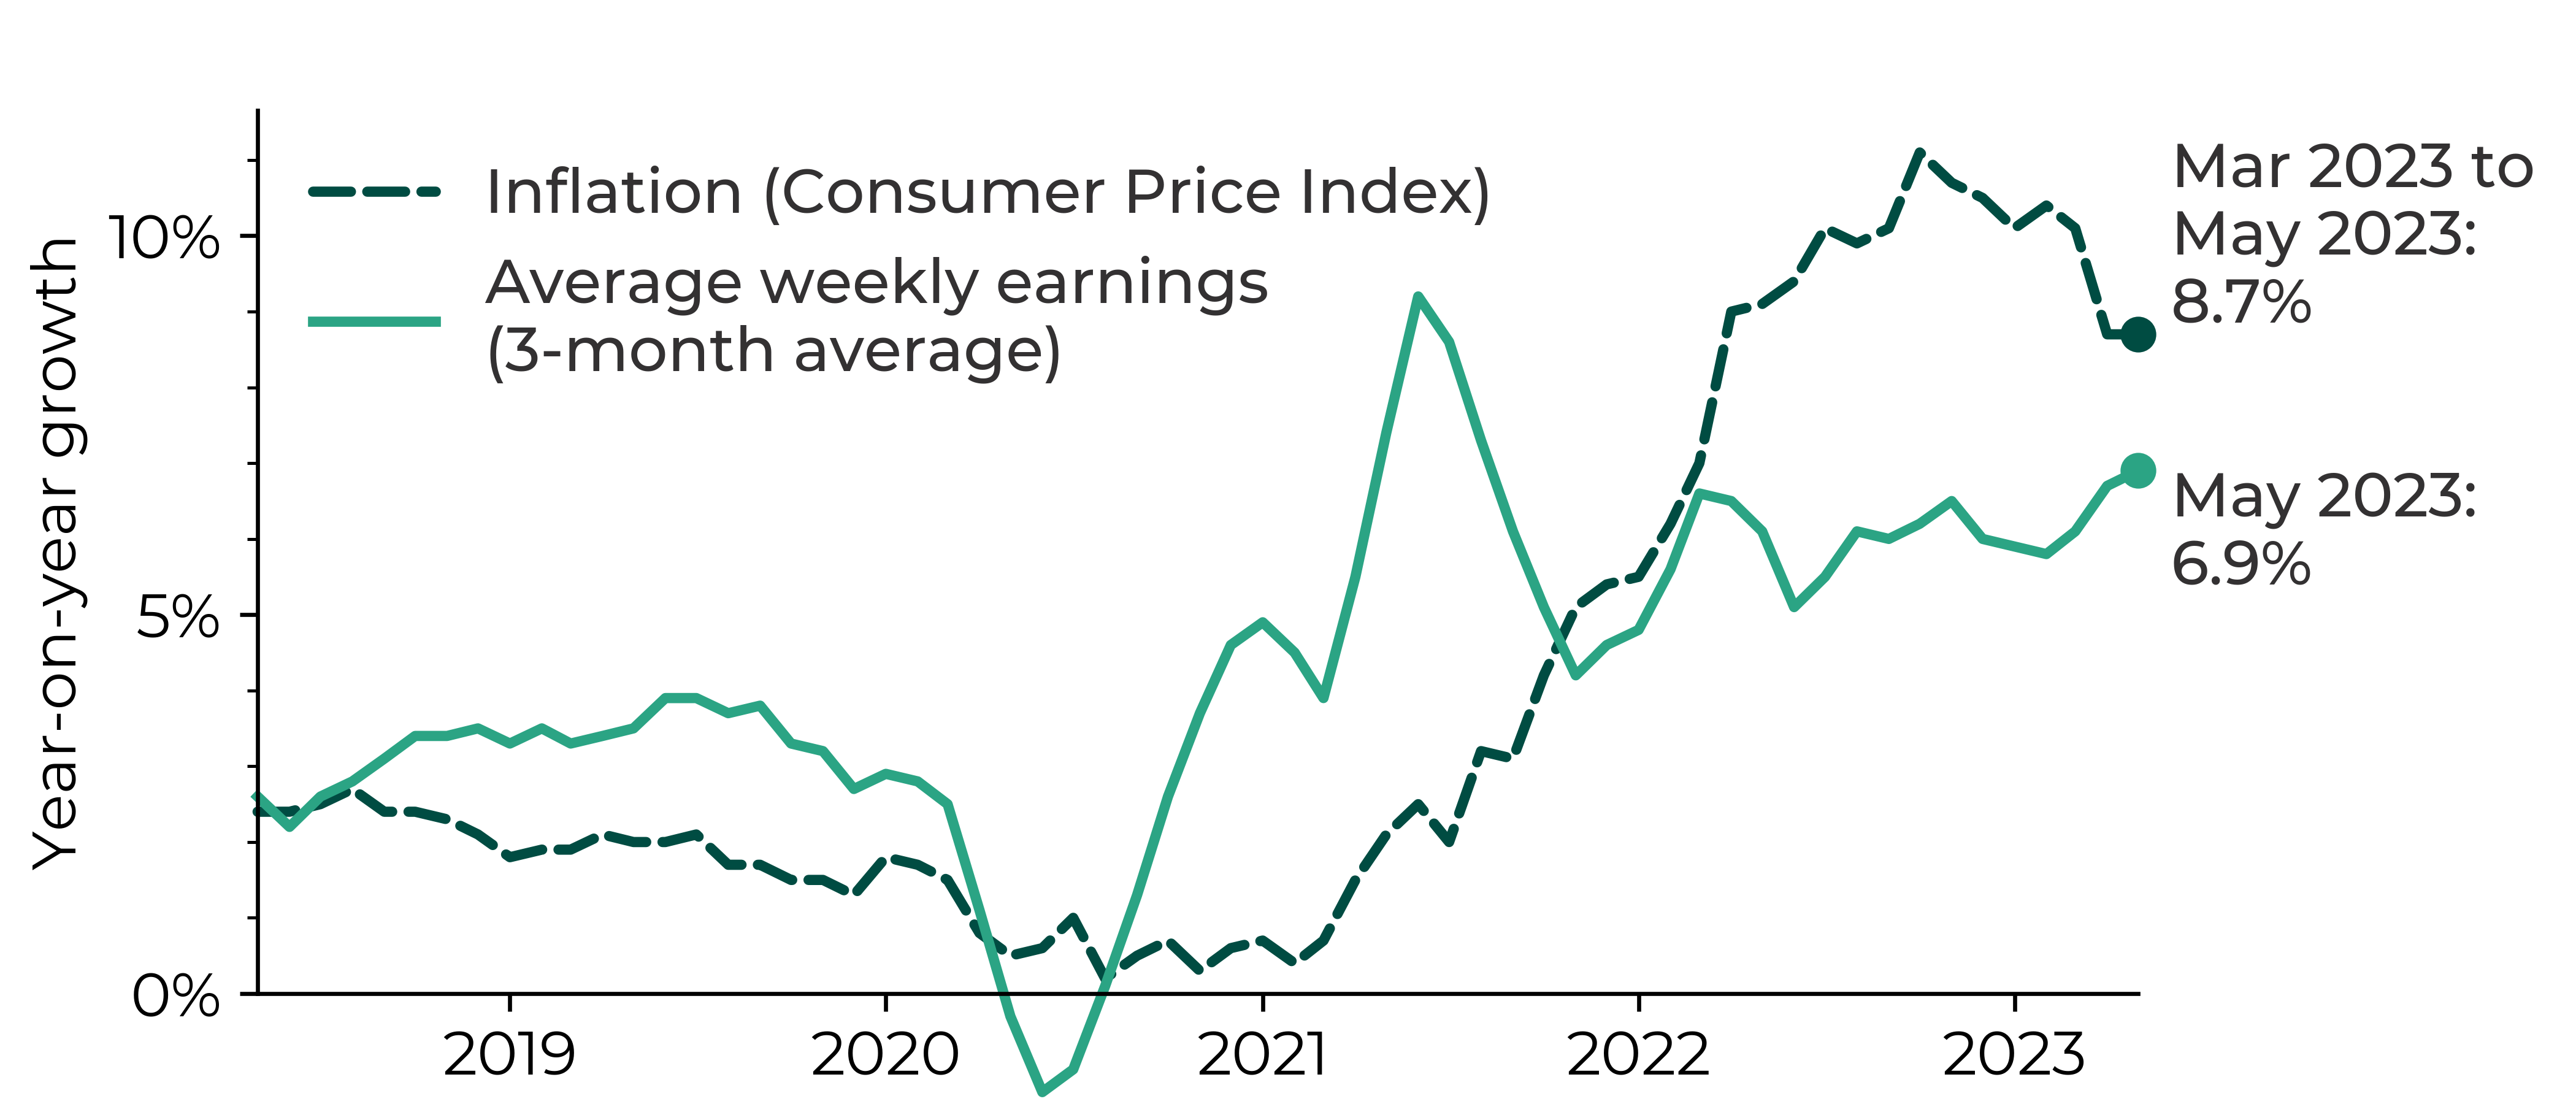 Graph showing UK inflation exceeding average weekly earnings (3-month average) in 2022-23. In May 2023, the average weekly earnings were 6.9% higher than for May 2022 whereas the Consumer Price Index inflation was at 8.7%.